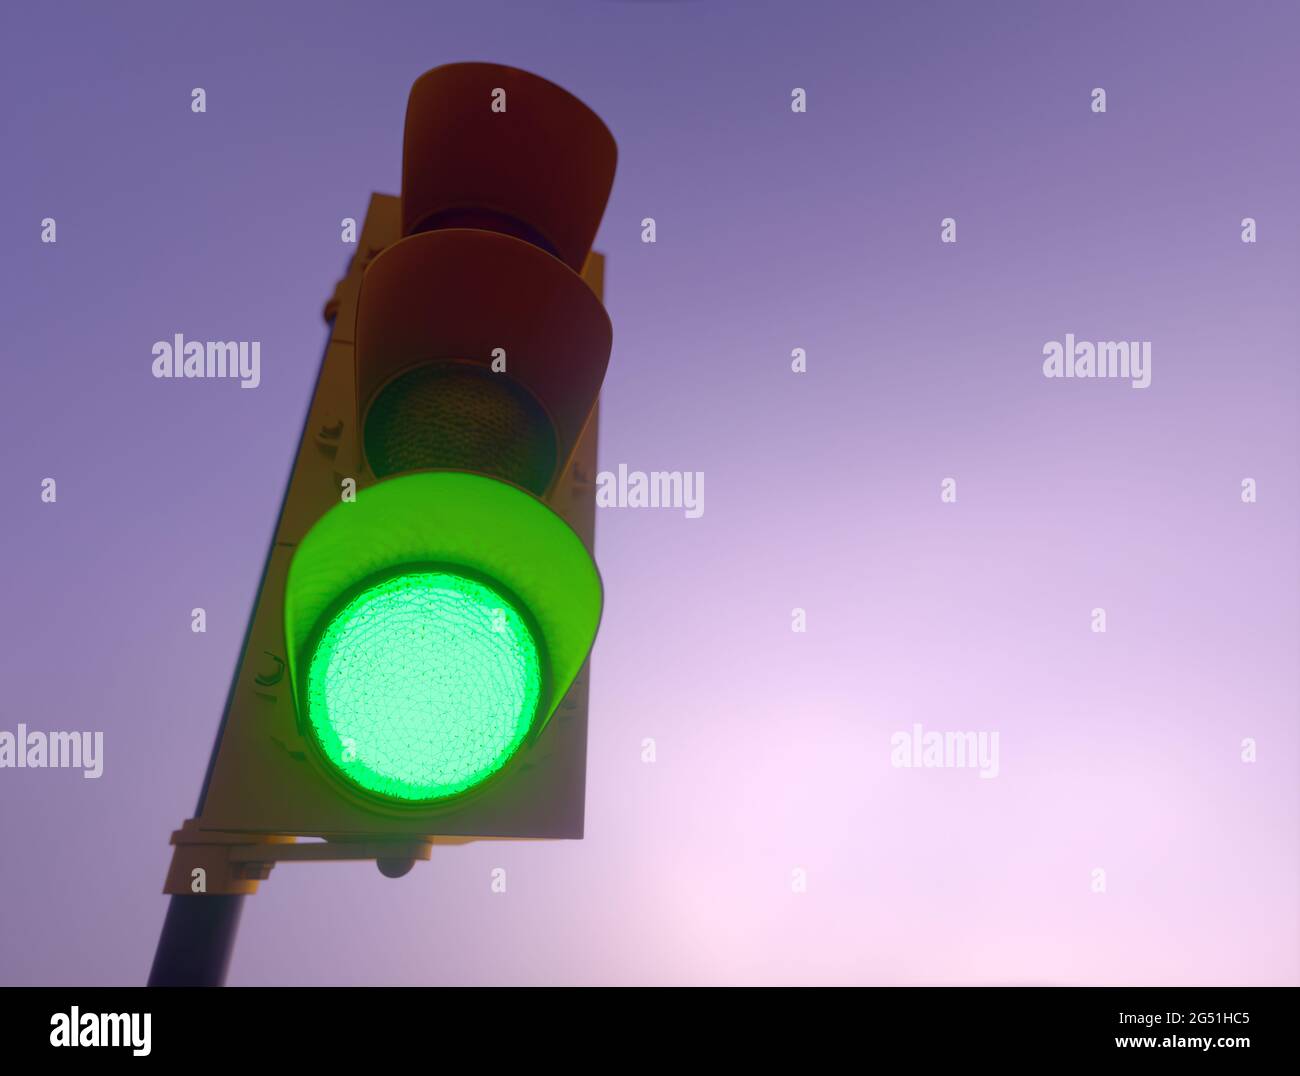 Outdoor vertical traffic light. Traffic control concept image with shallow depth of field. Stock Photo